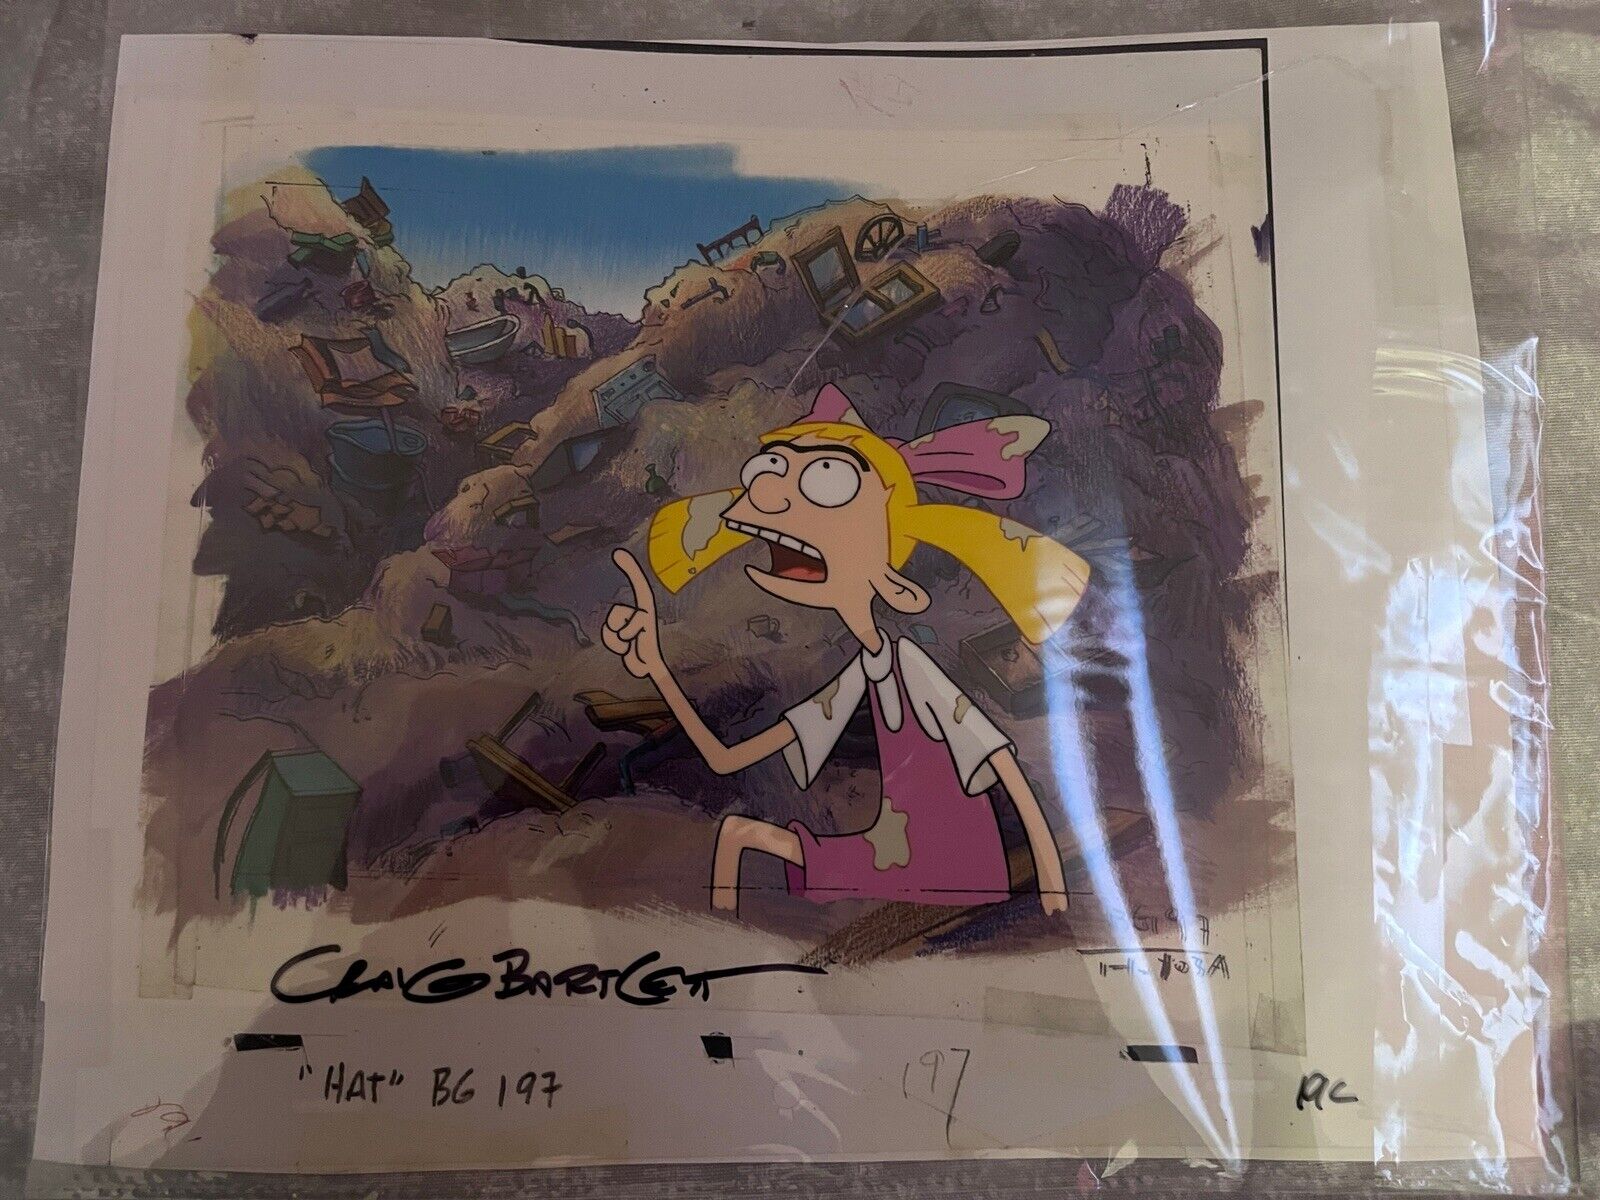 Nickelodeon Hey Arnold cel “Arnold’s hat” W/ COA Rare (From Craig’s Collection)